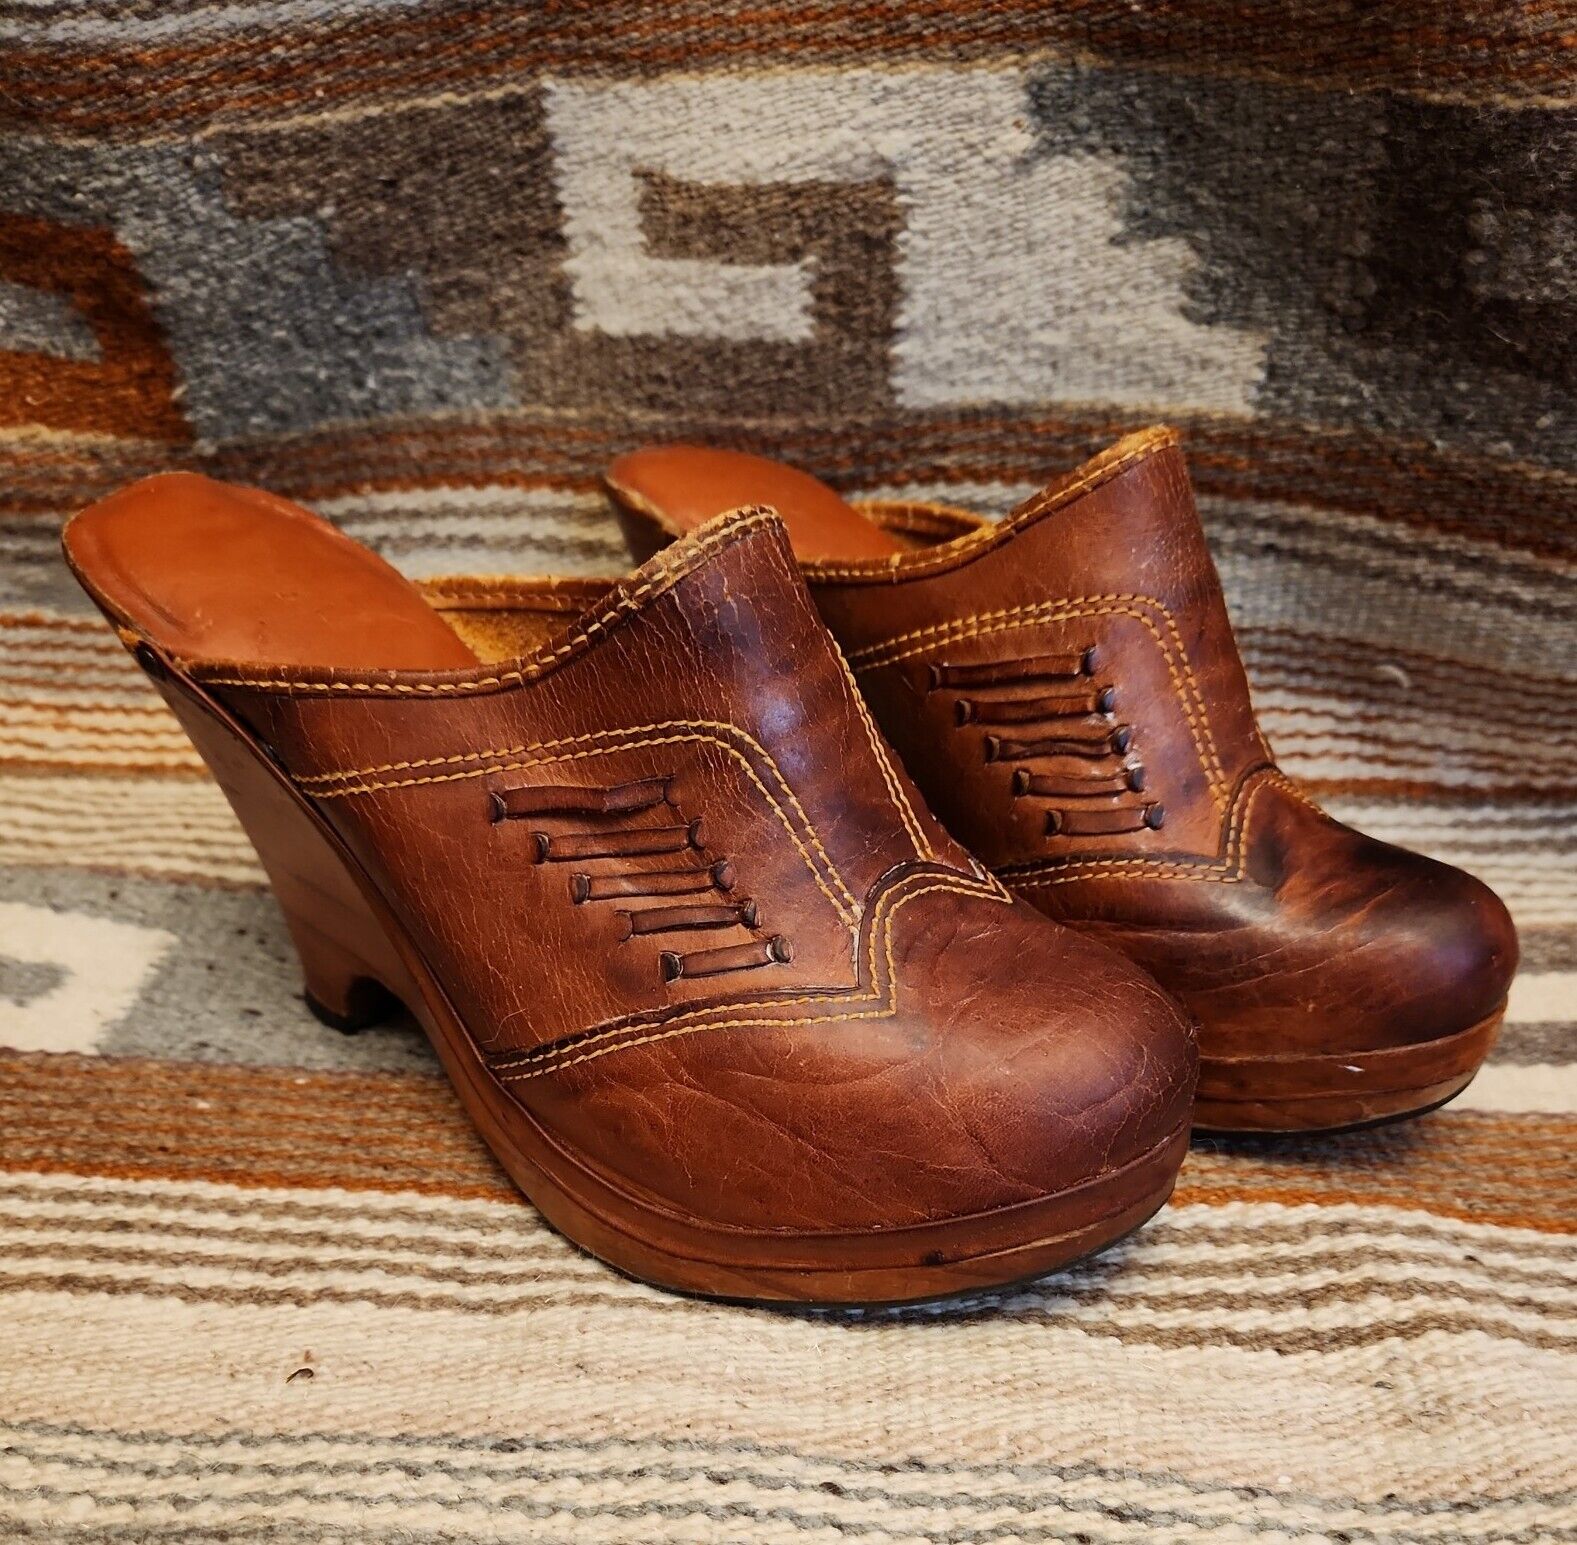 Vintage 70s Woven Leather+wood Clogs 8 Chestnut Brown High Heel Wooden Wedges